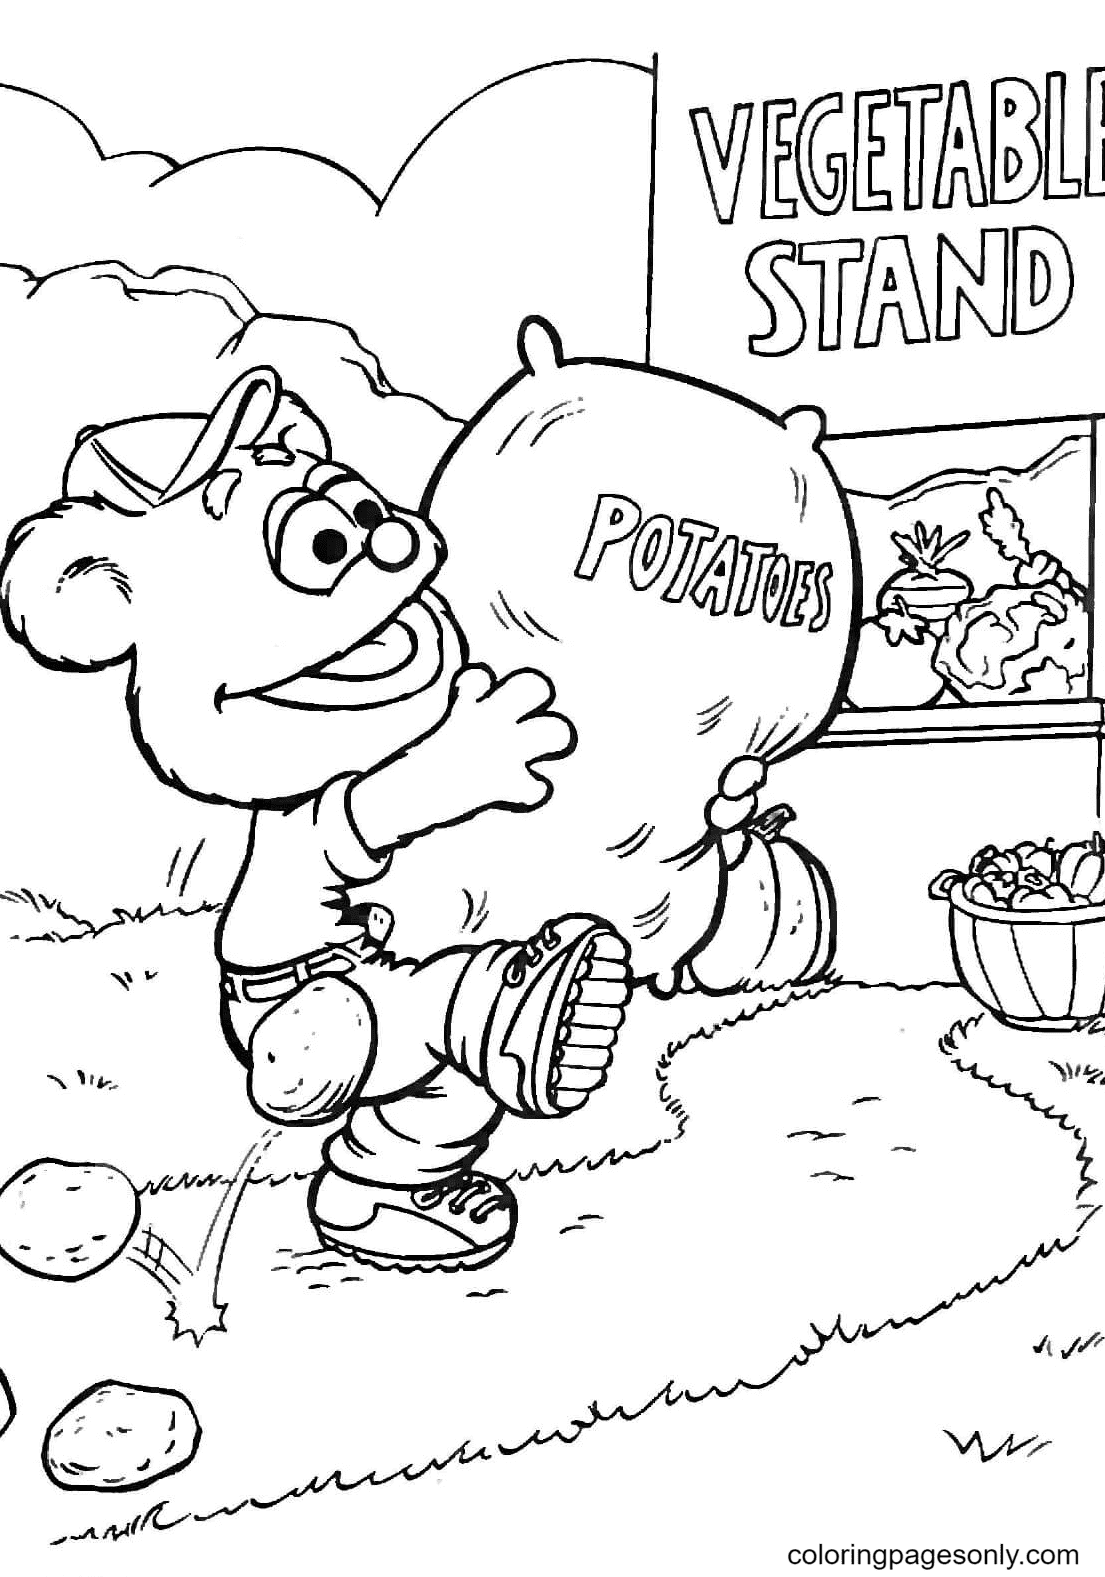 Fozzie brings a sack of potatoes Coloring Pages